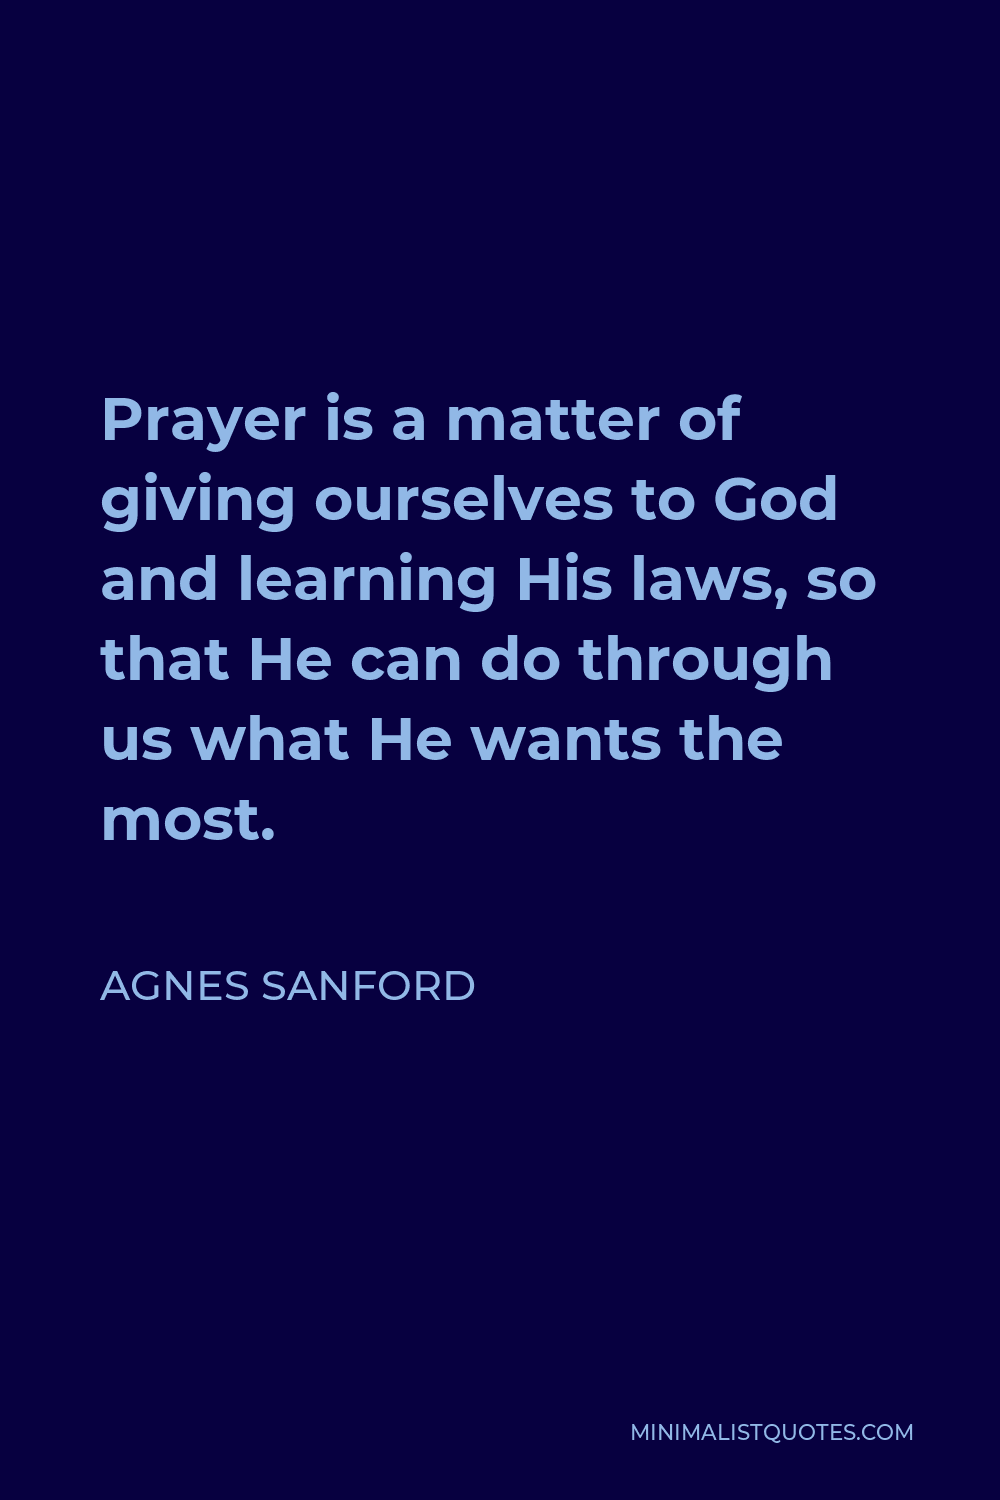 Agnes Sanford Quote - Prayer is a matter of giving ourselves to God and learning His laws, so that He can do through us what He wants the most.